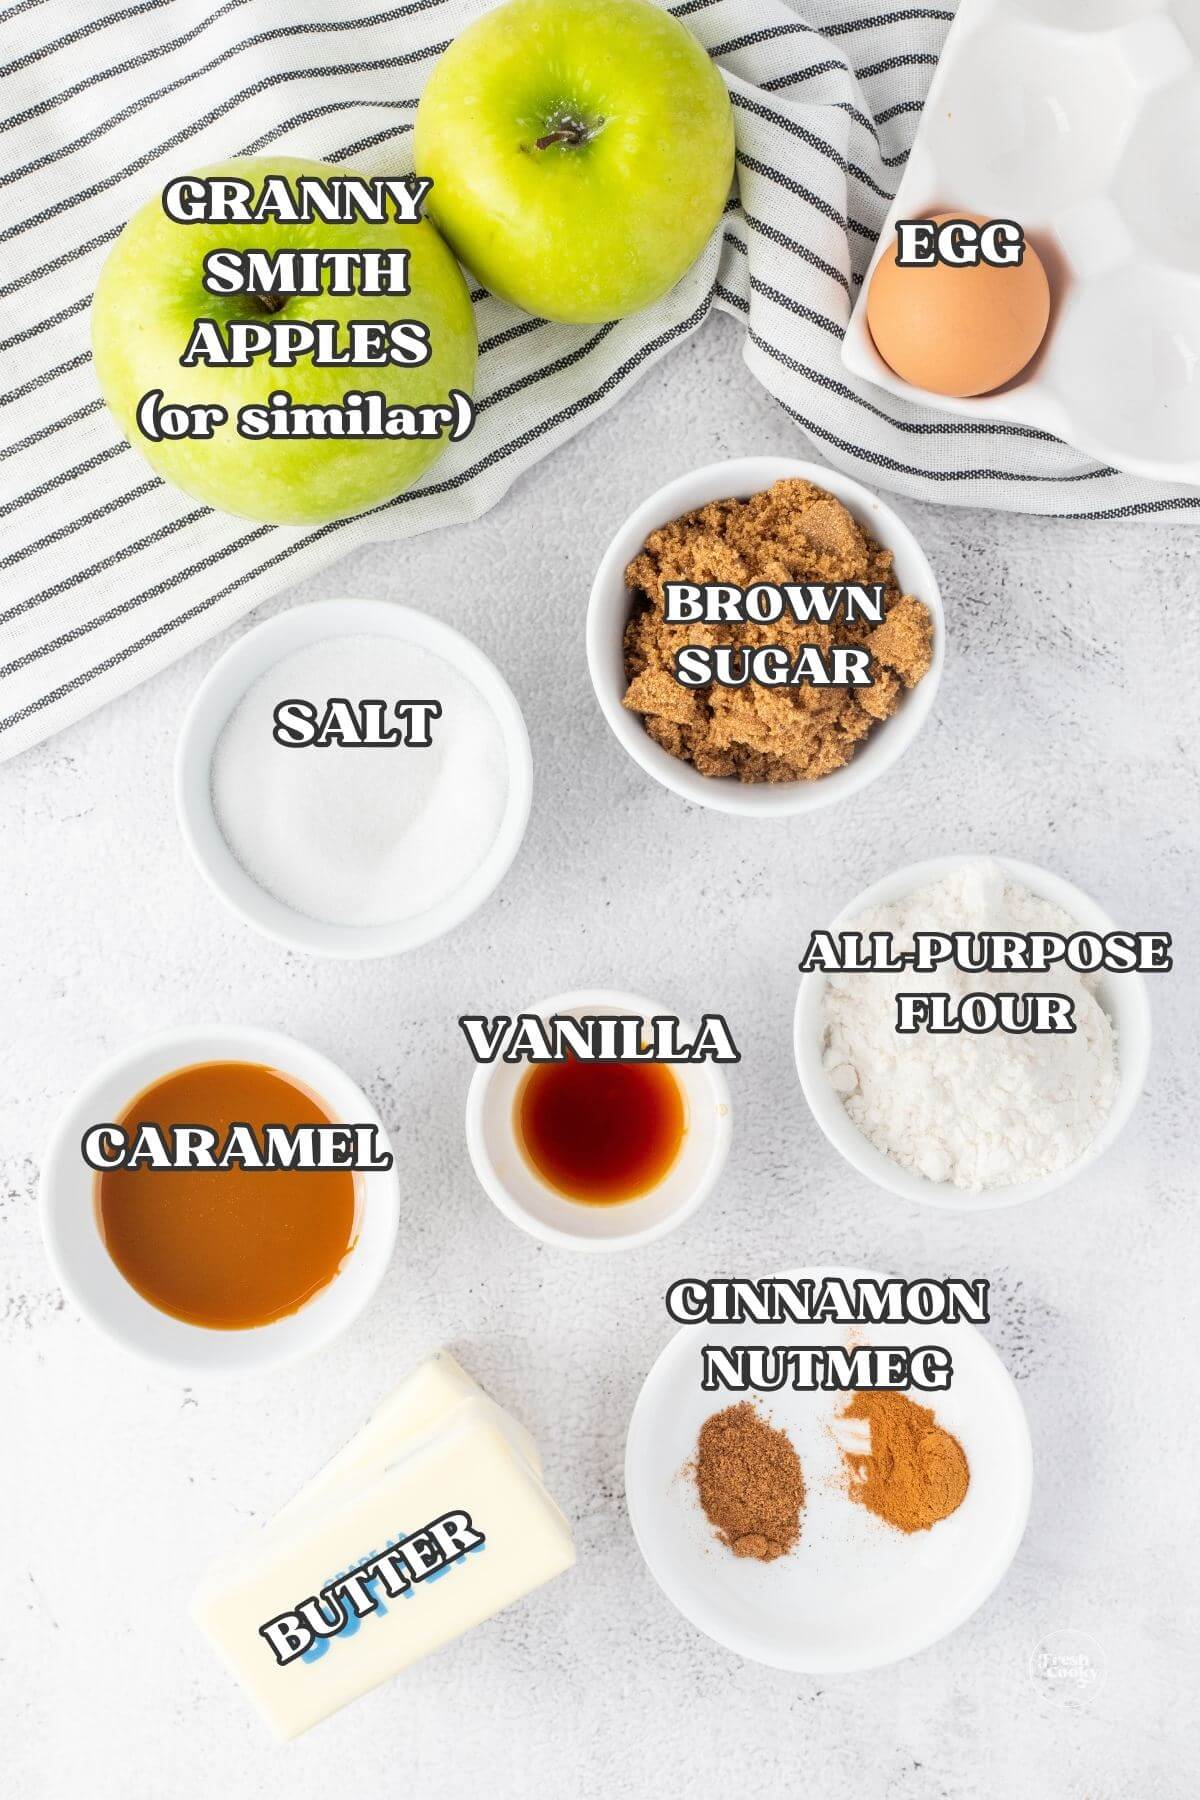 Labeled ingredients for mini apple pie recipe.